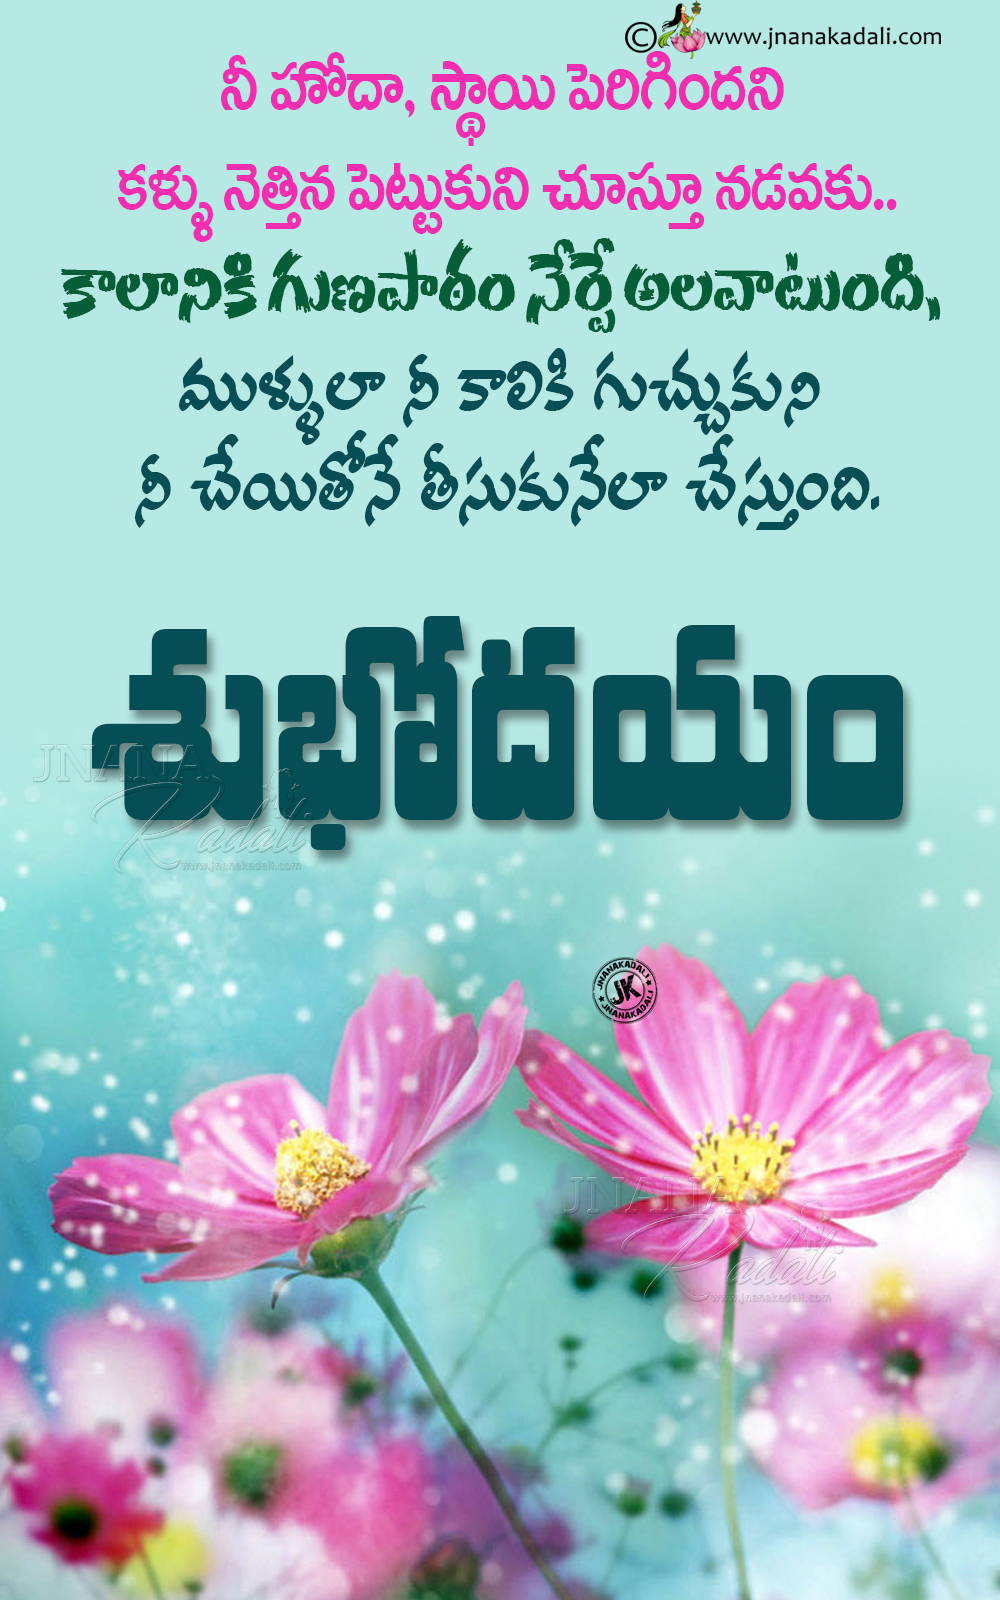 Best Telugu Good Morning Quotes hd wallpapers Free download ...